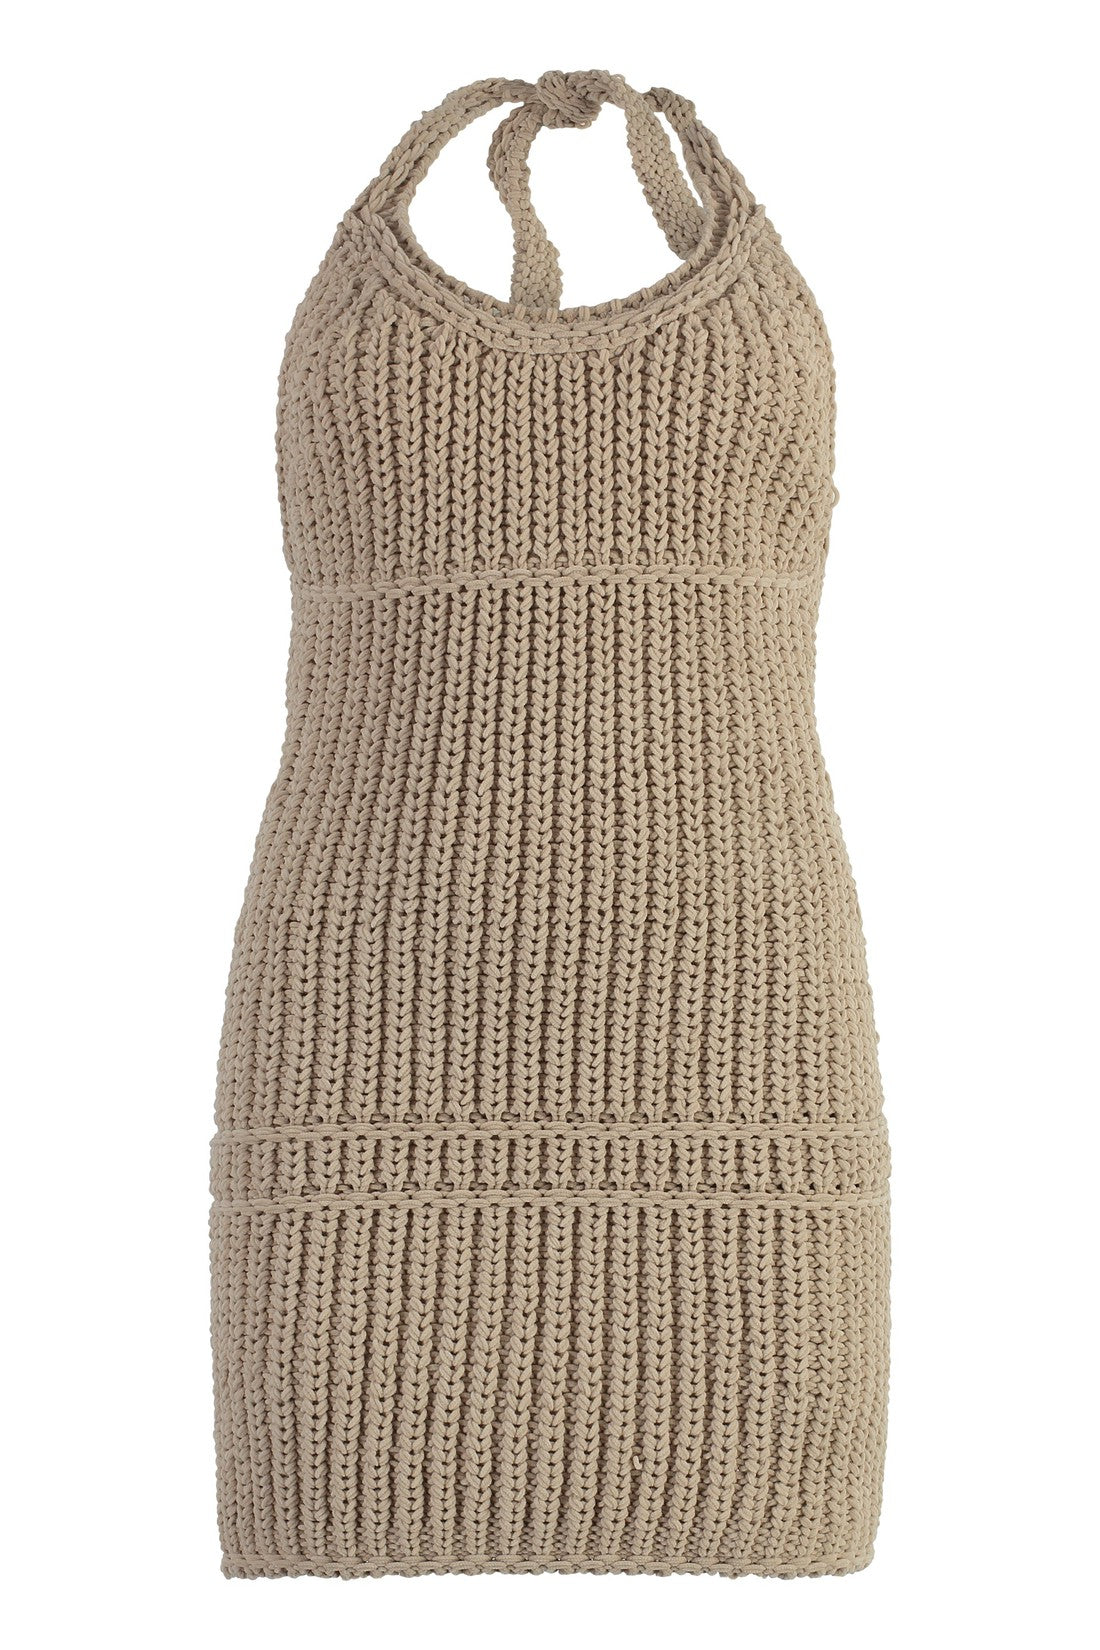 Jacquemus-OUTLET-SALE-Nuvola knitted dress-ARCHIVIST